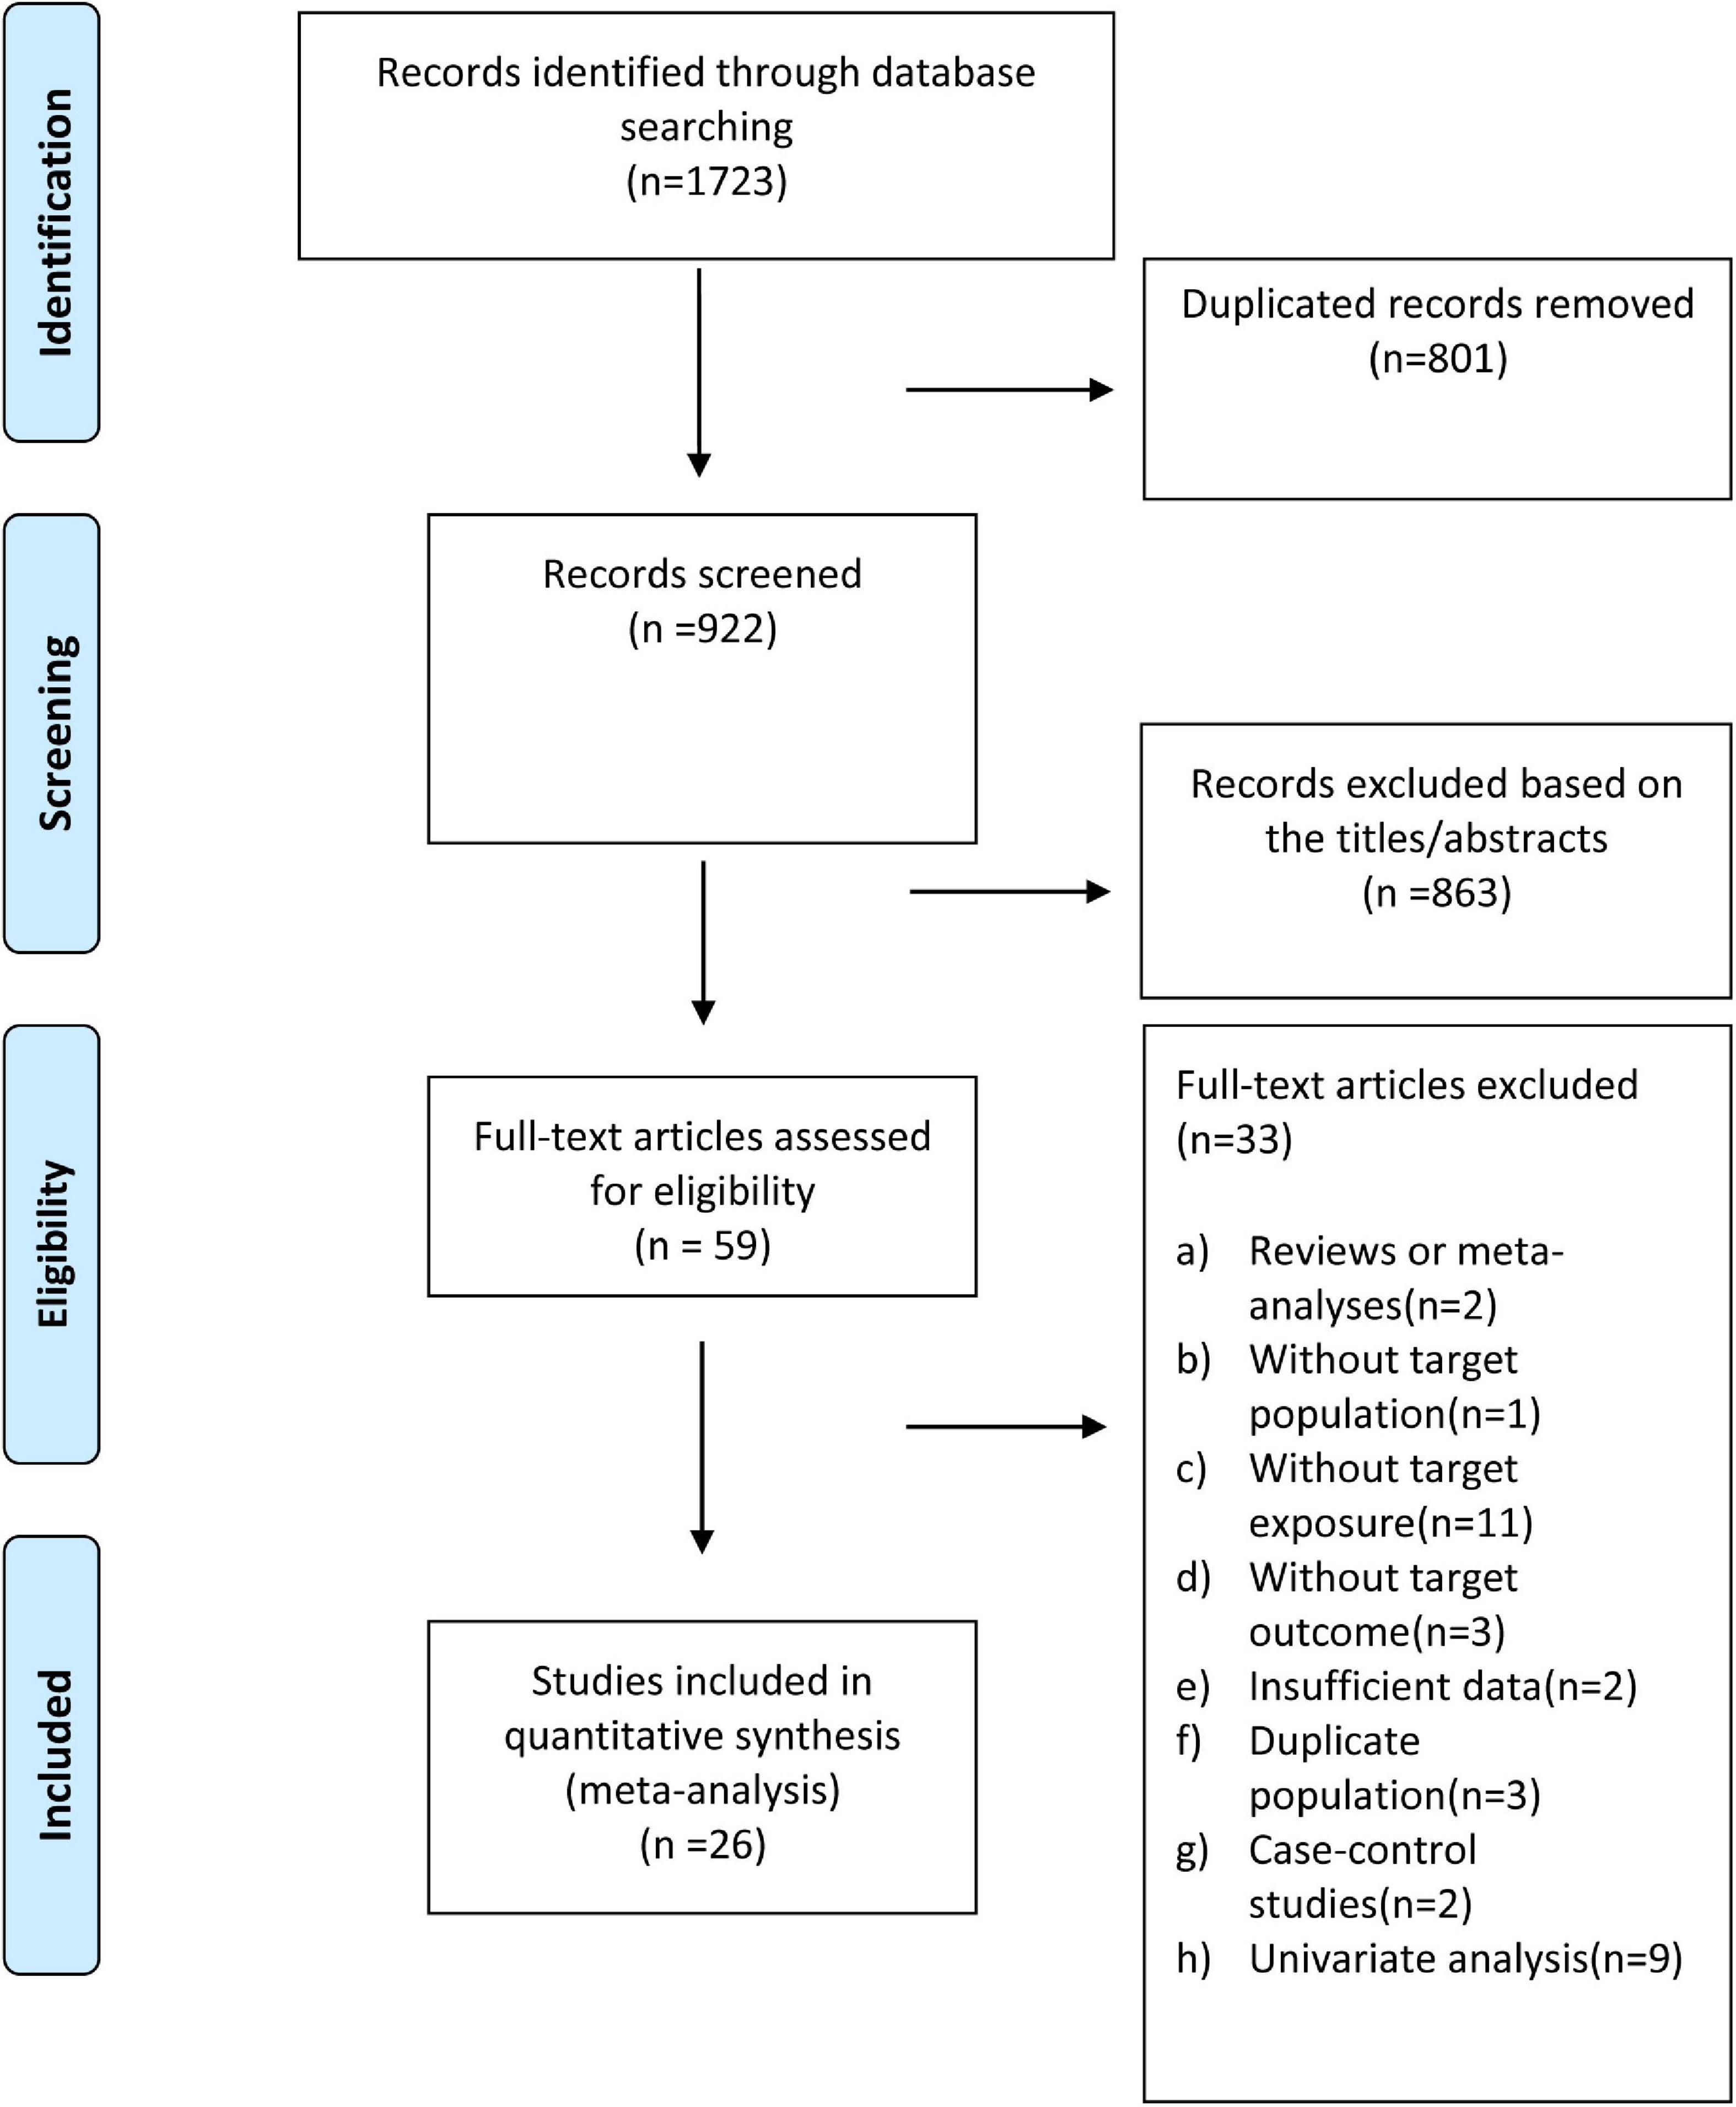 Body mass index and atrial fibrillation recurrence post ablation: A systematic review and dose-response meta-analysis